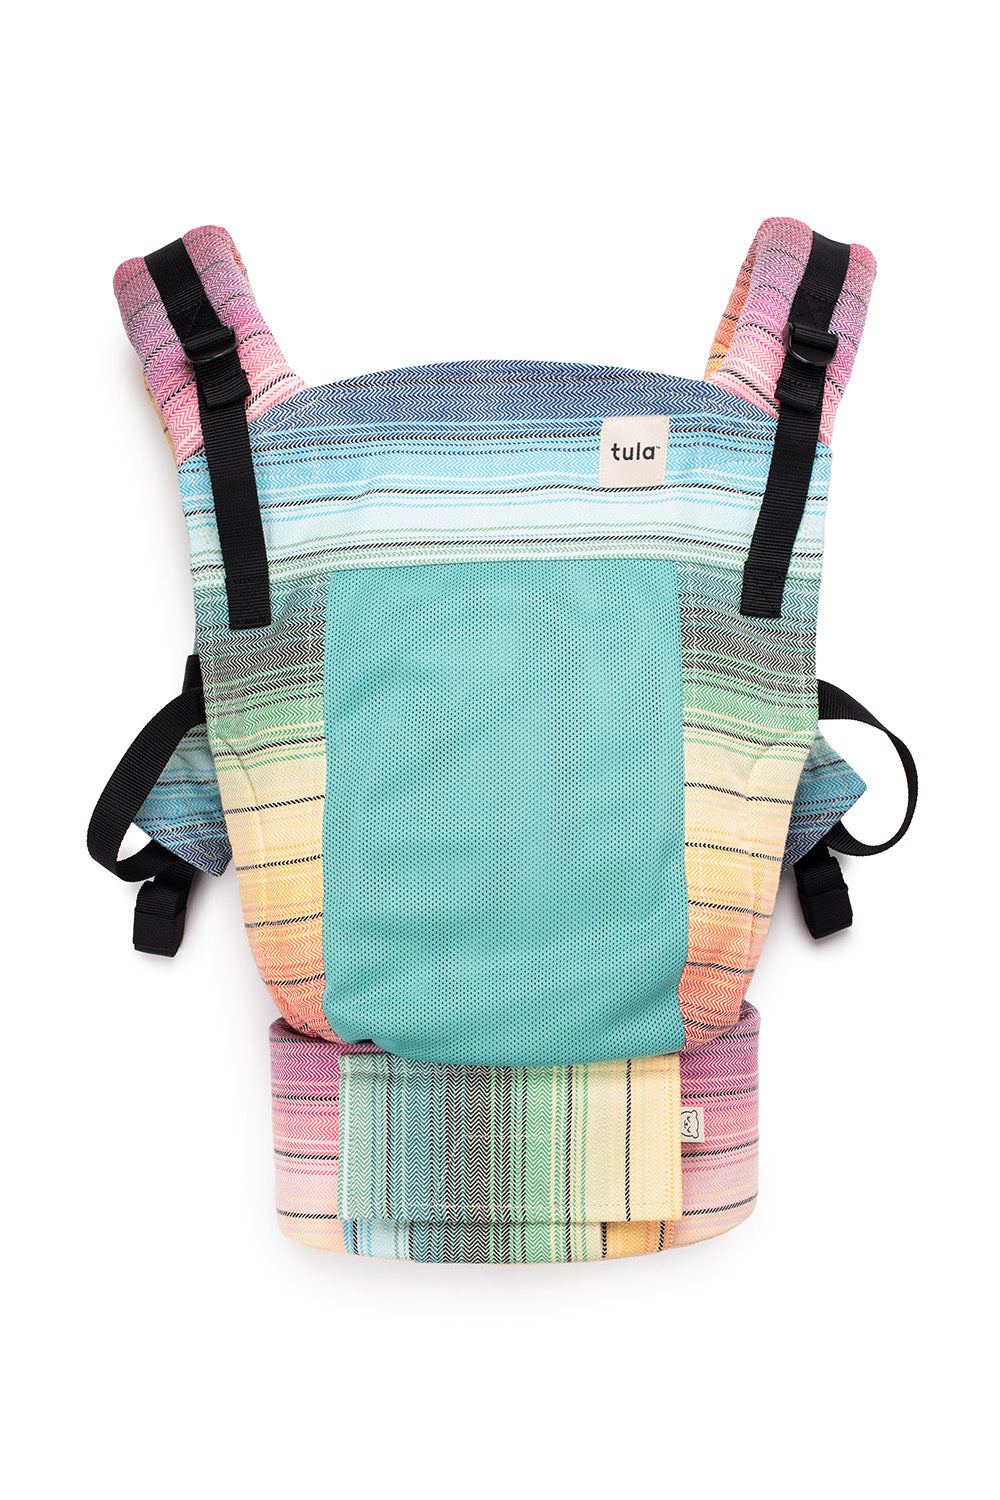 Sunset - Signature Handwoven Free-to-Grow Mesh Baby Carrier